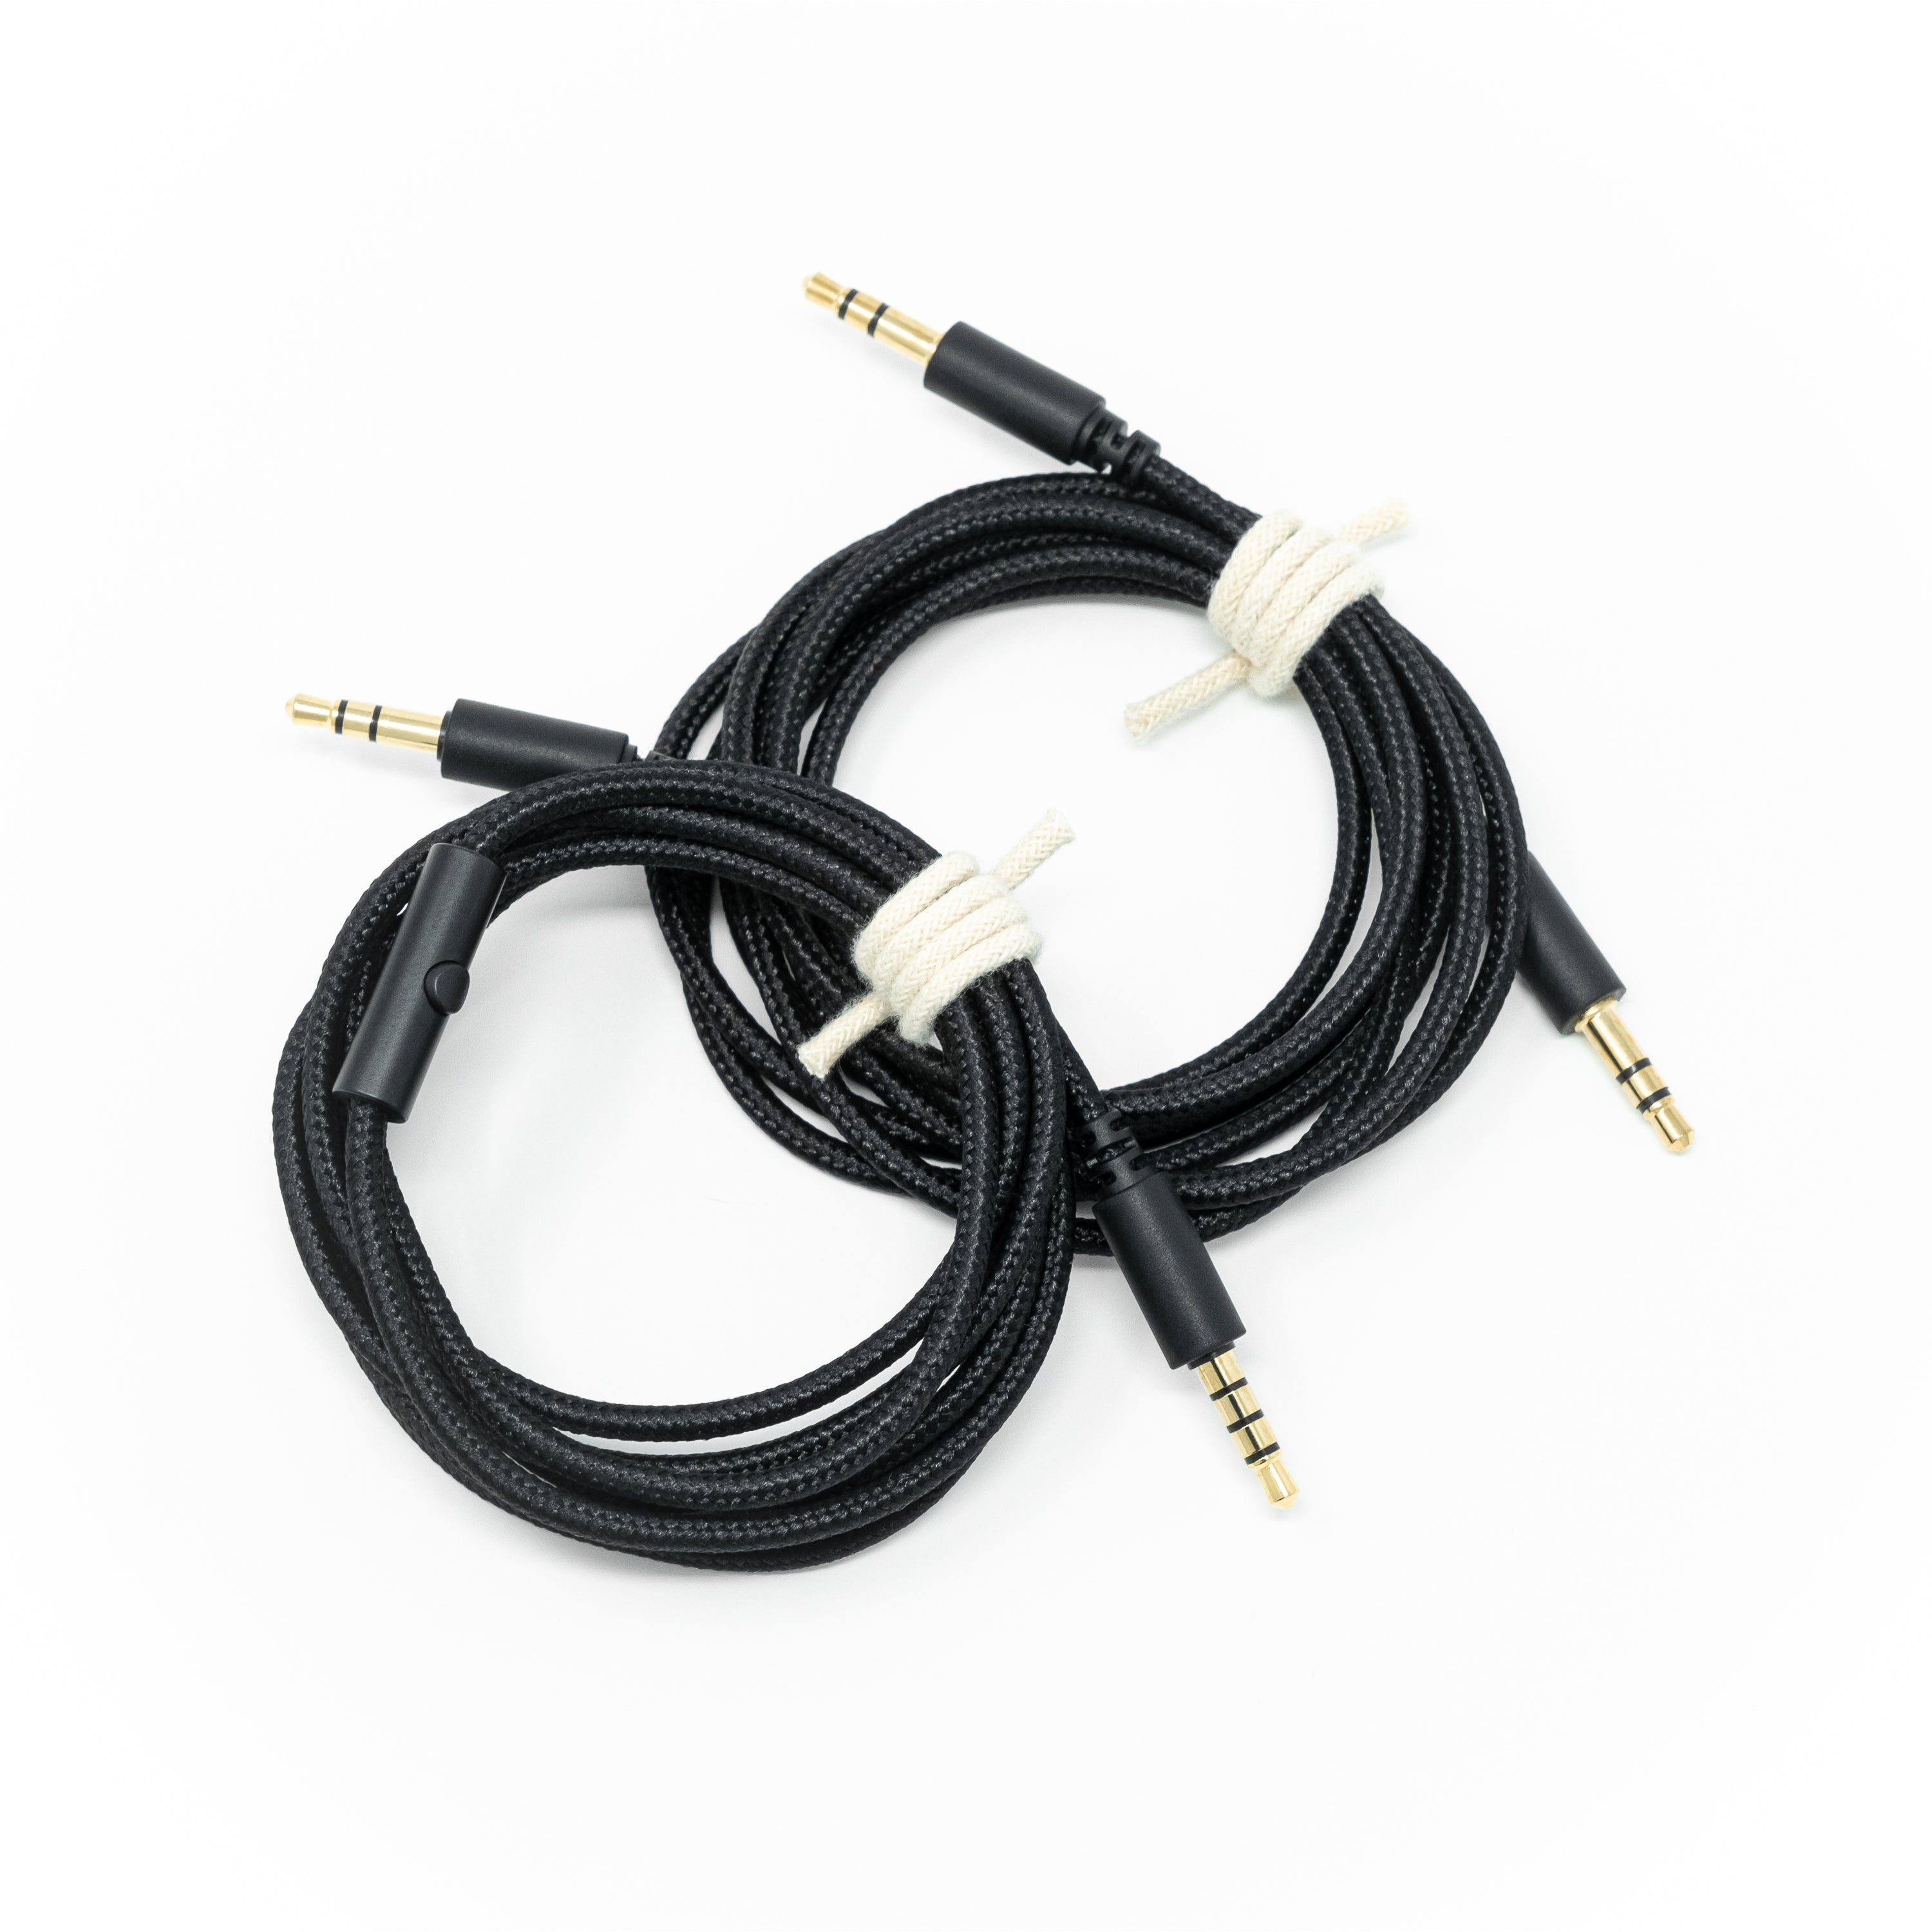 Headphone cable for thinksound ov21/On2/On1